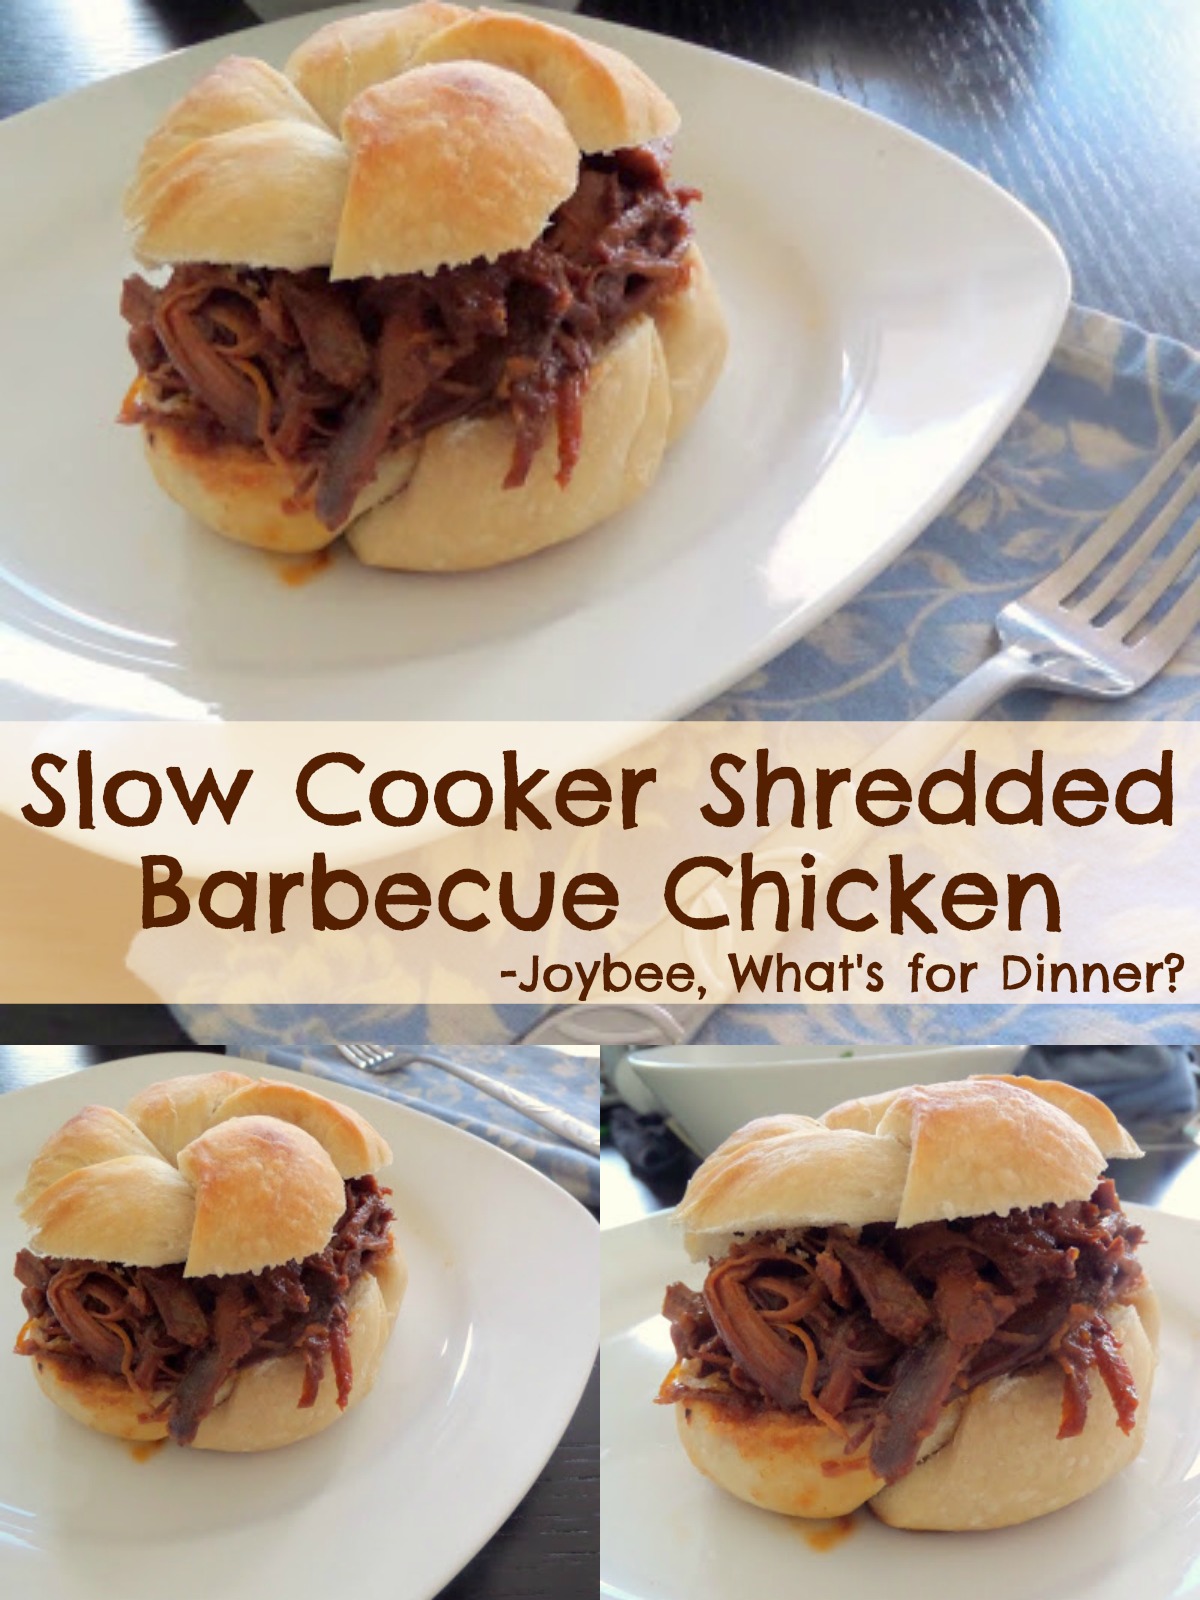 Slow Cooker Shredded Barbecue Chicken | Joybee, What's for Dinner?